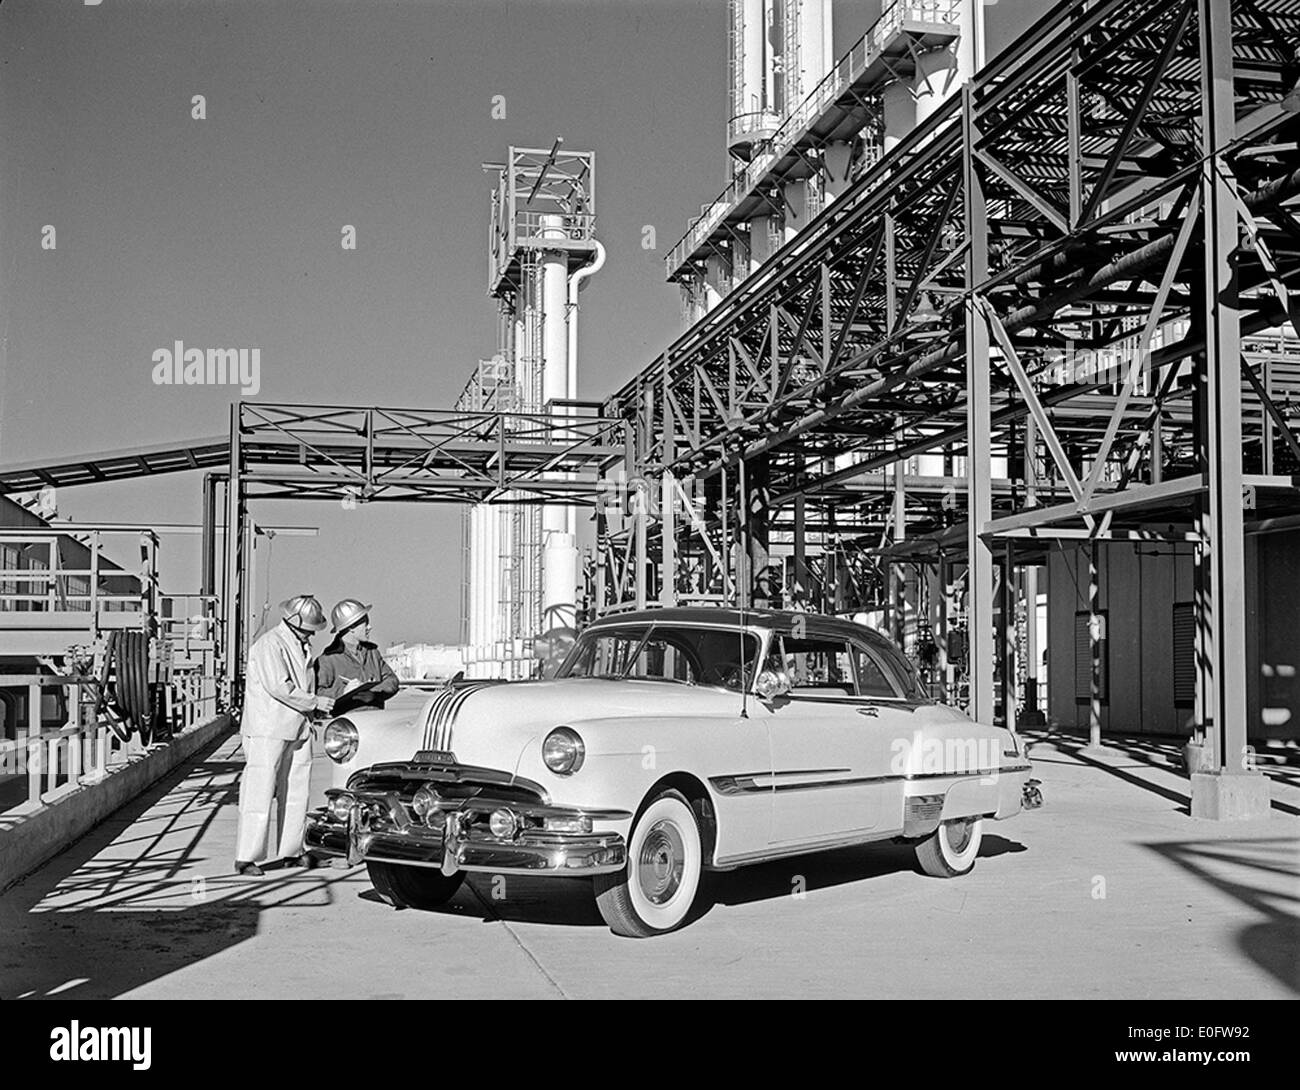 [1952 Pontiac Chieftain DeLuxe Catalina, Dow Chemical Plant, General Motors Corp.] Stock Photo